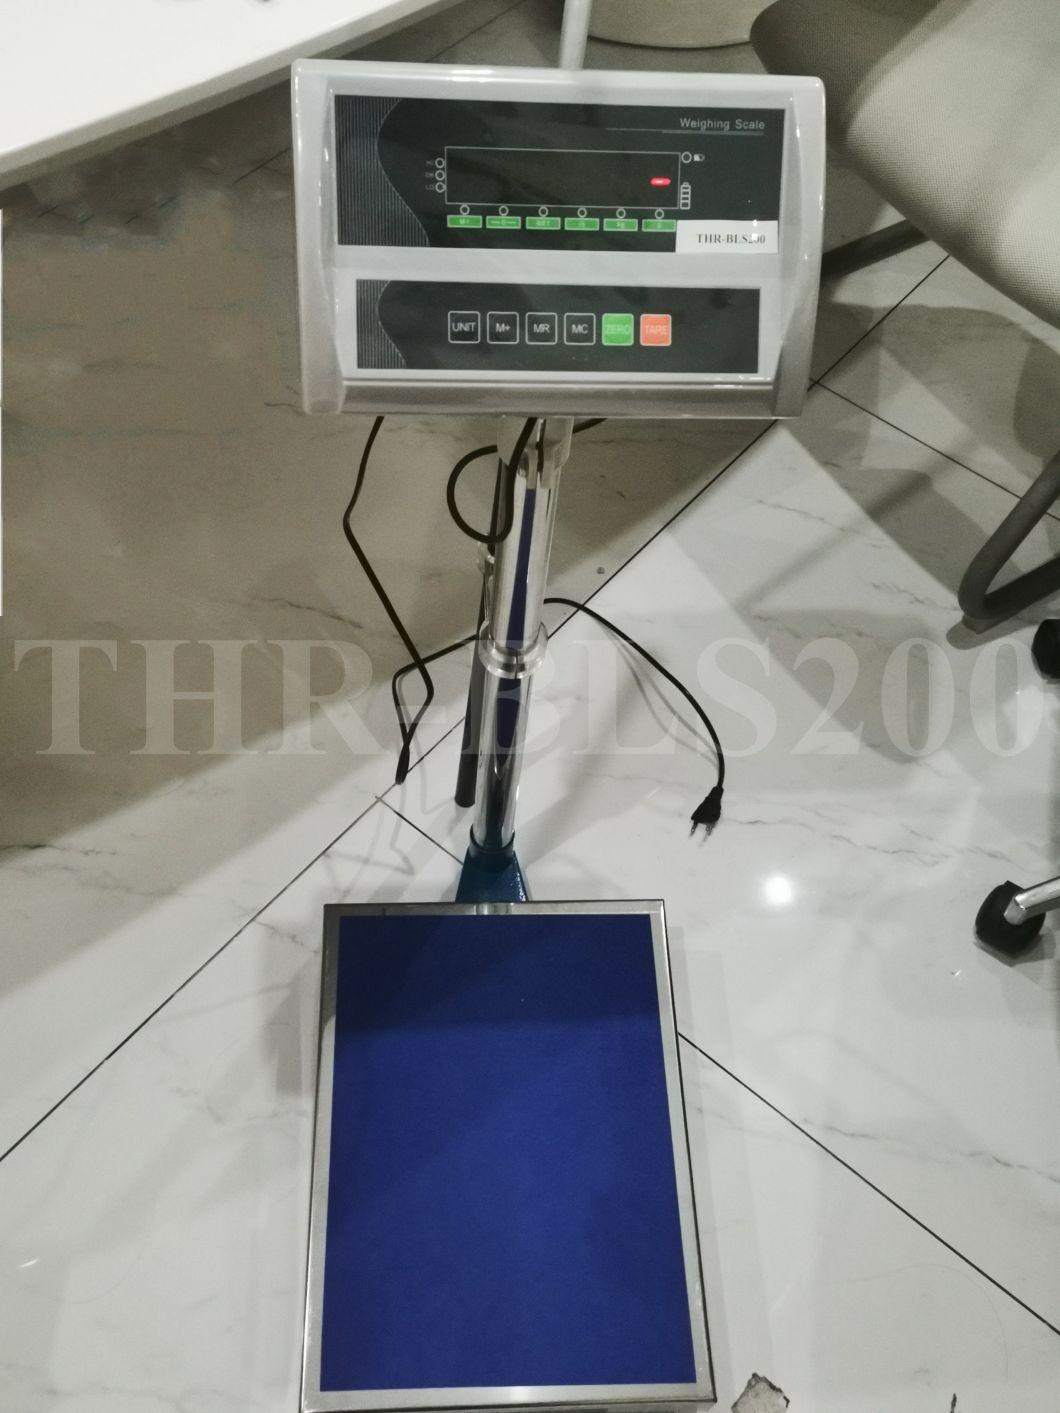 Height and Weight Scale (Thr-Bls200)